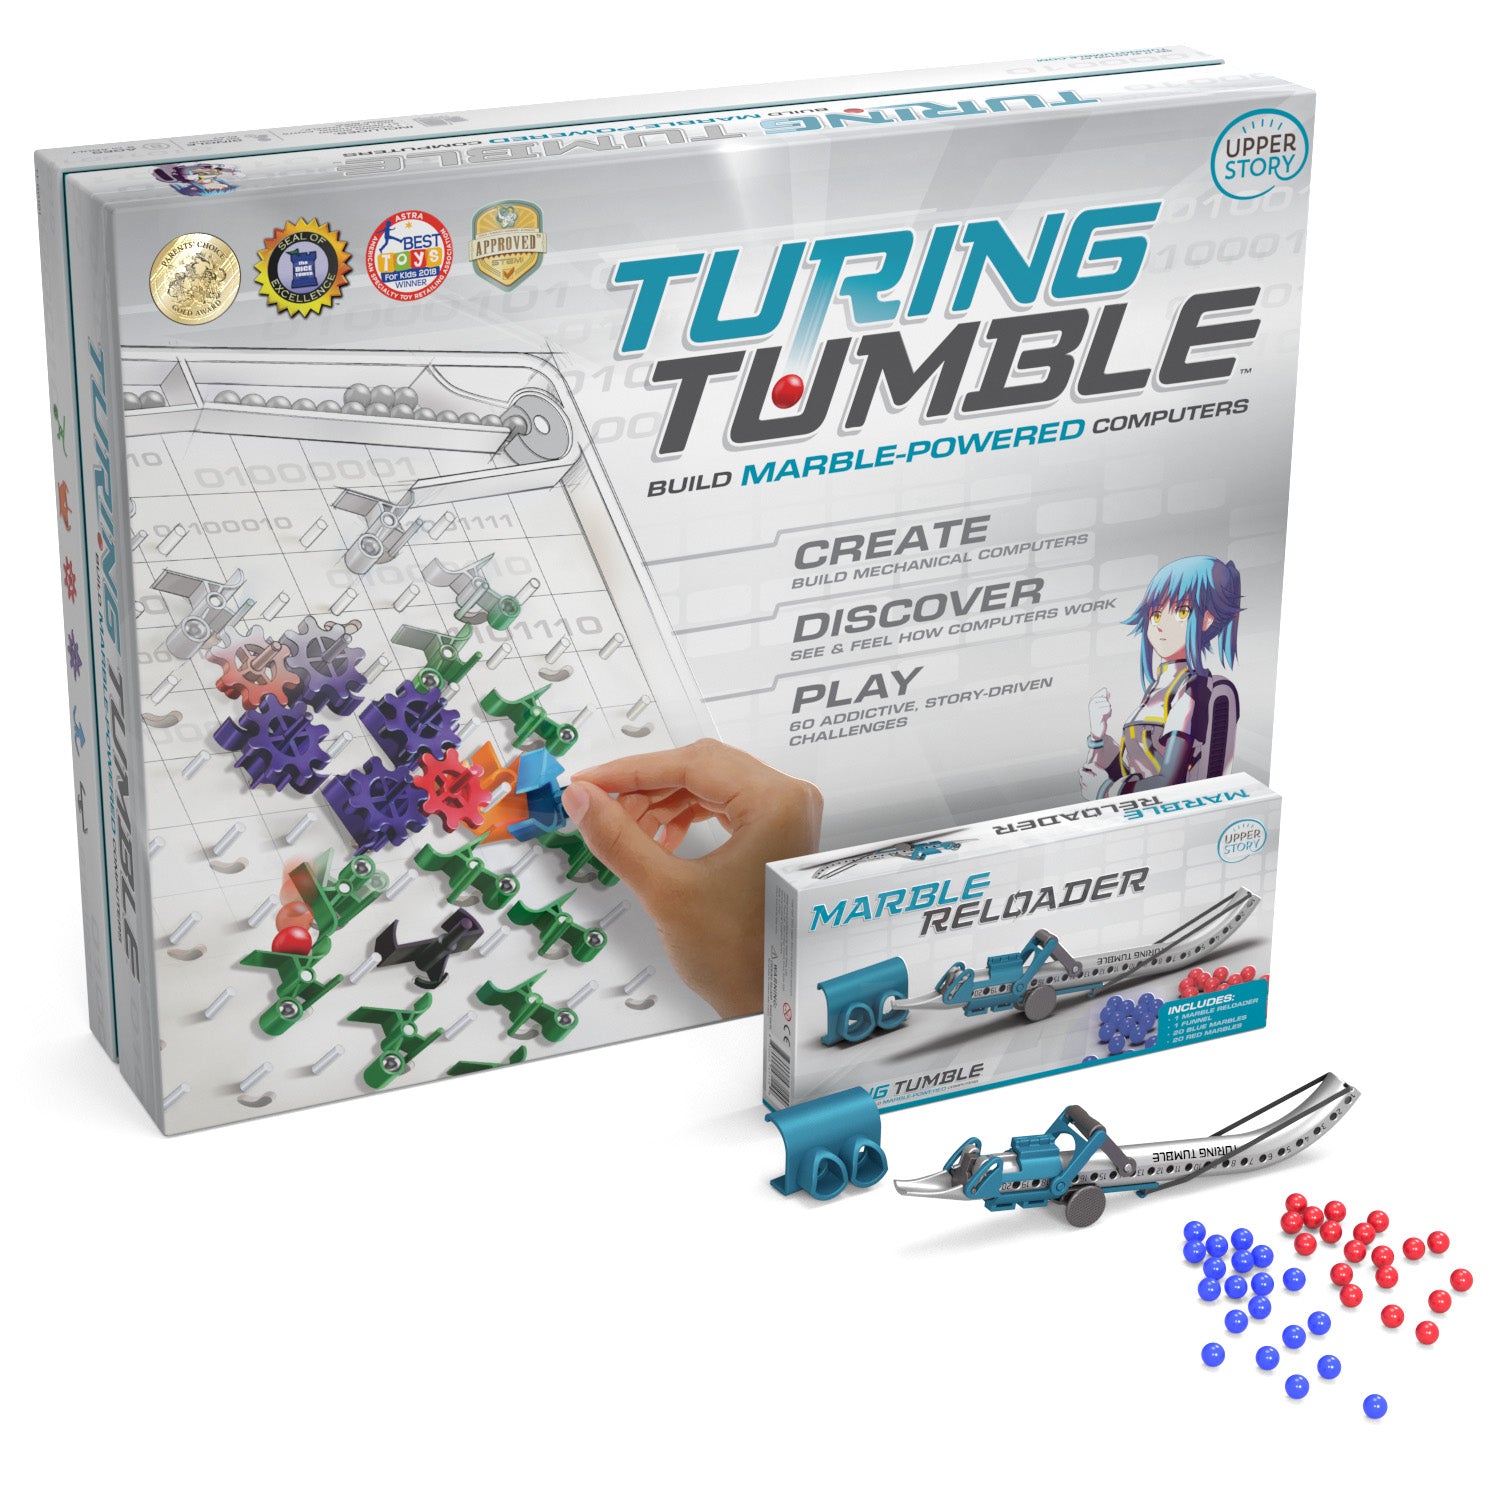 Turing Tumble – Upper Story